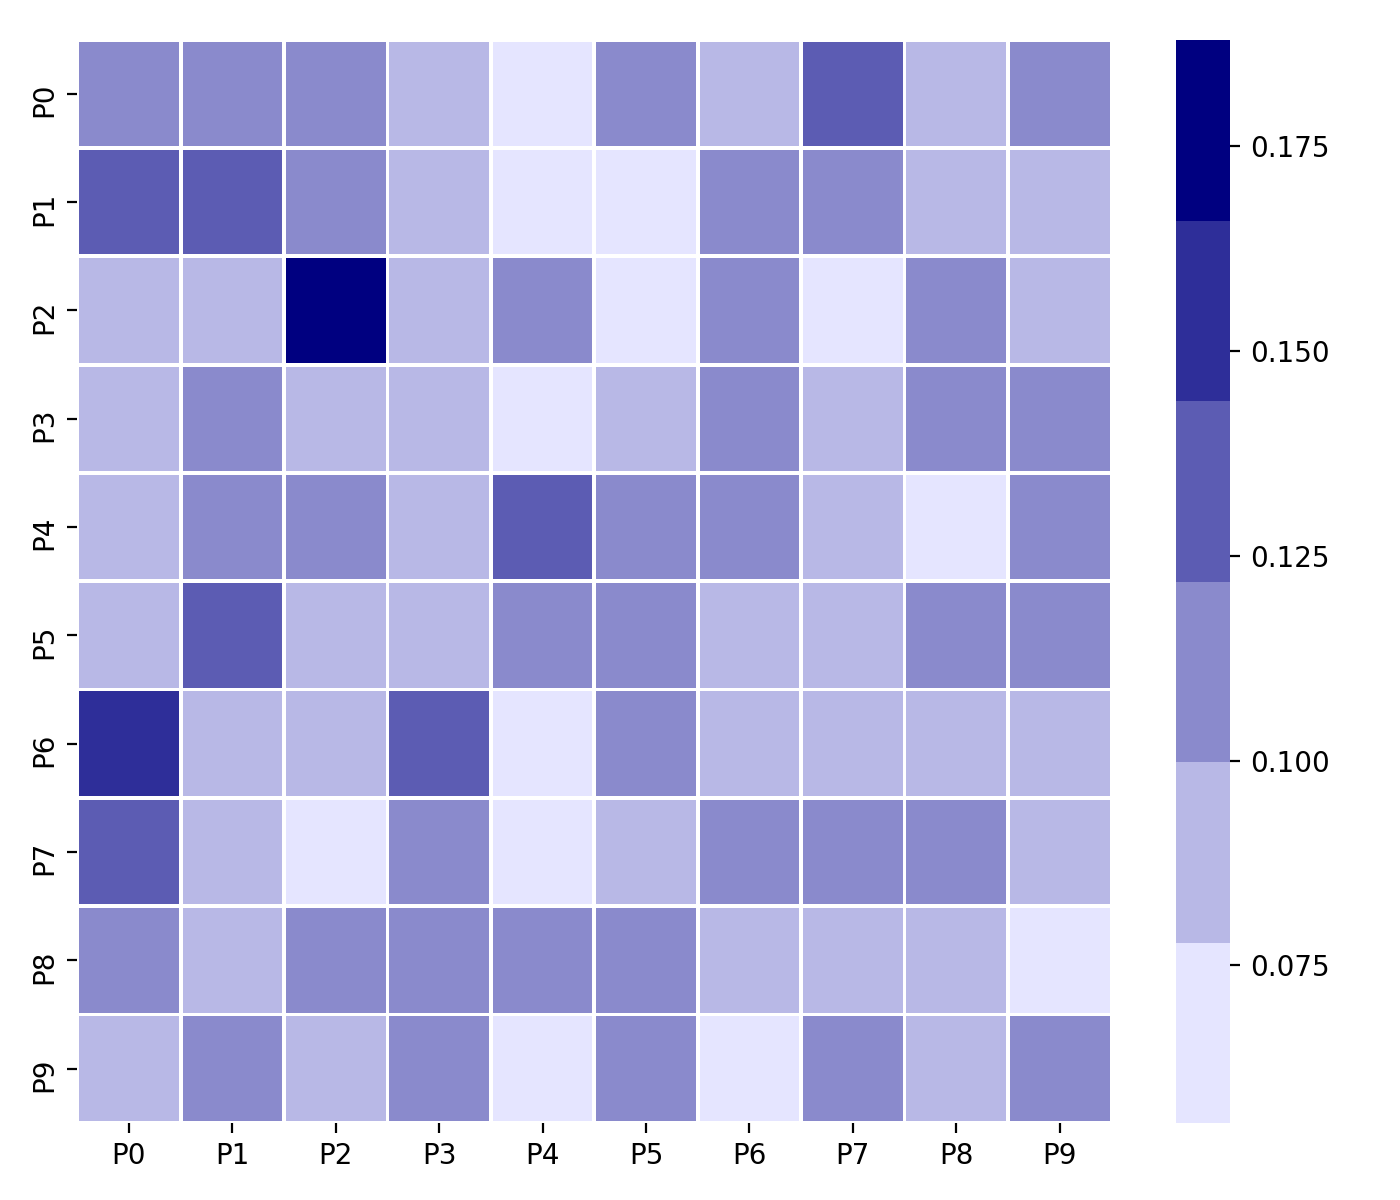 _images/heatmap_example.png